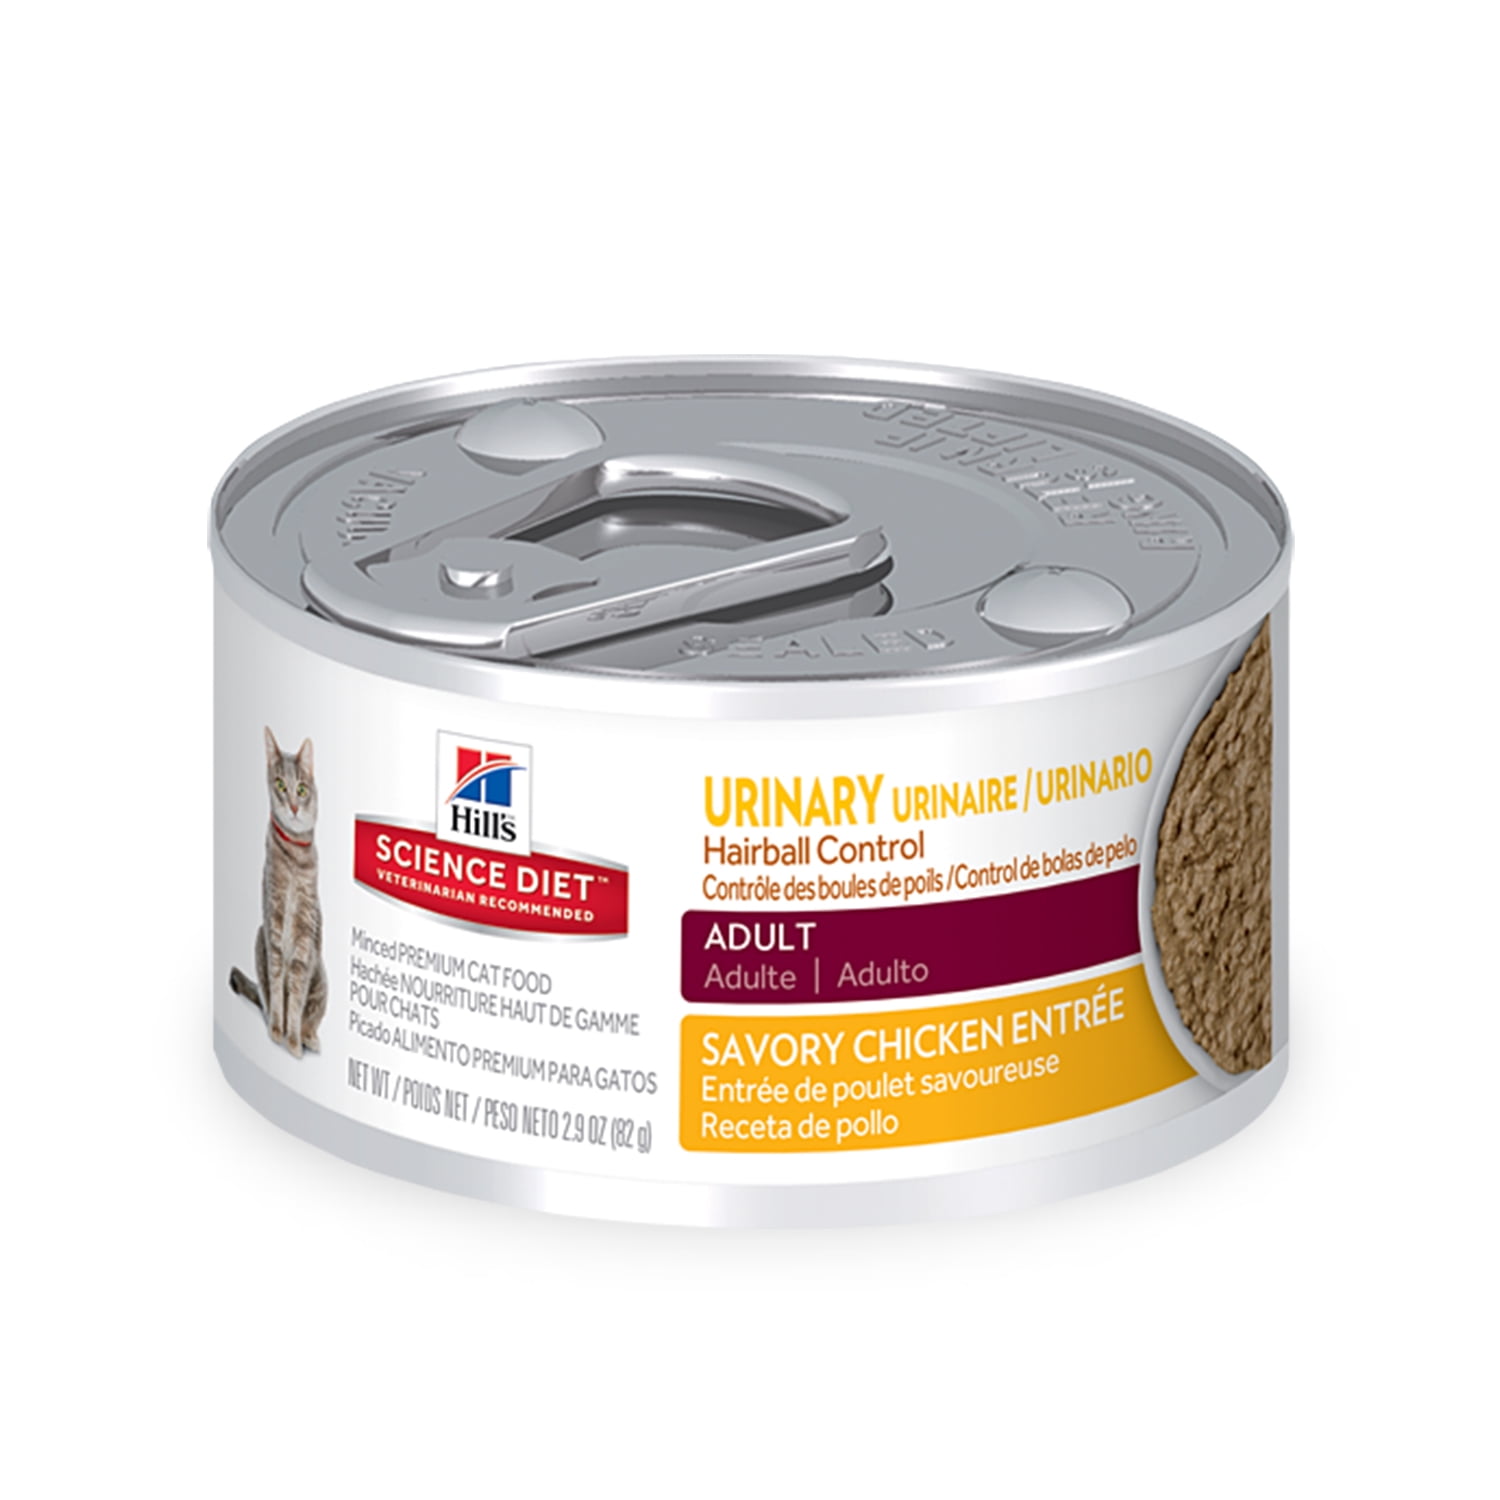 Hill's Science Diet Adult Urinary & Hairball Control Canned Cat Food